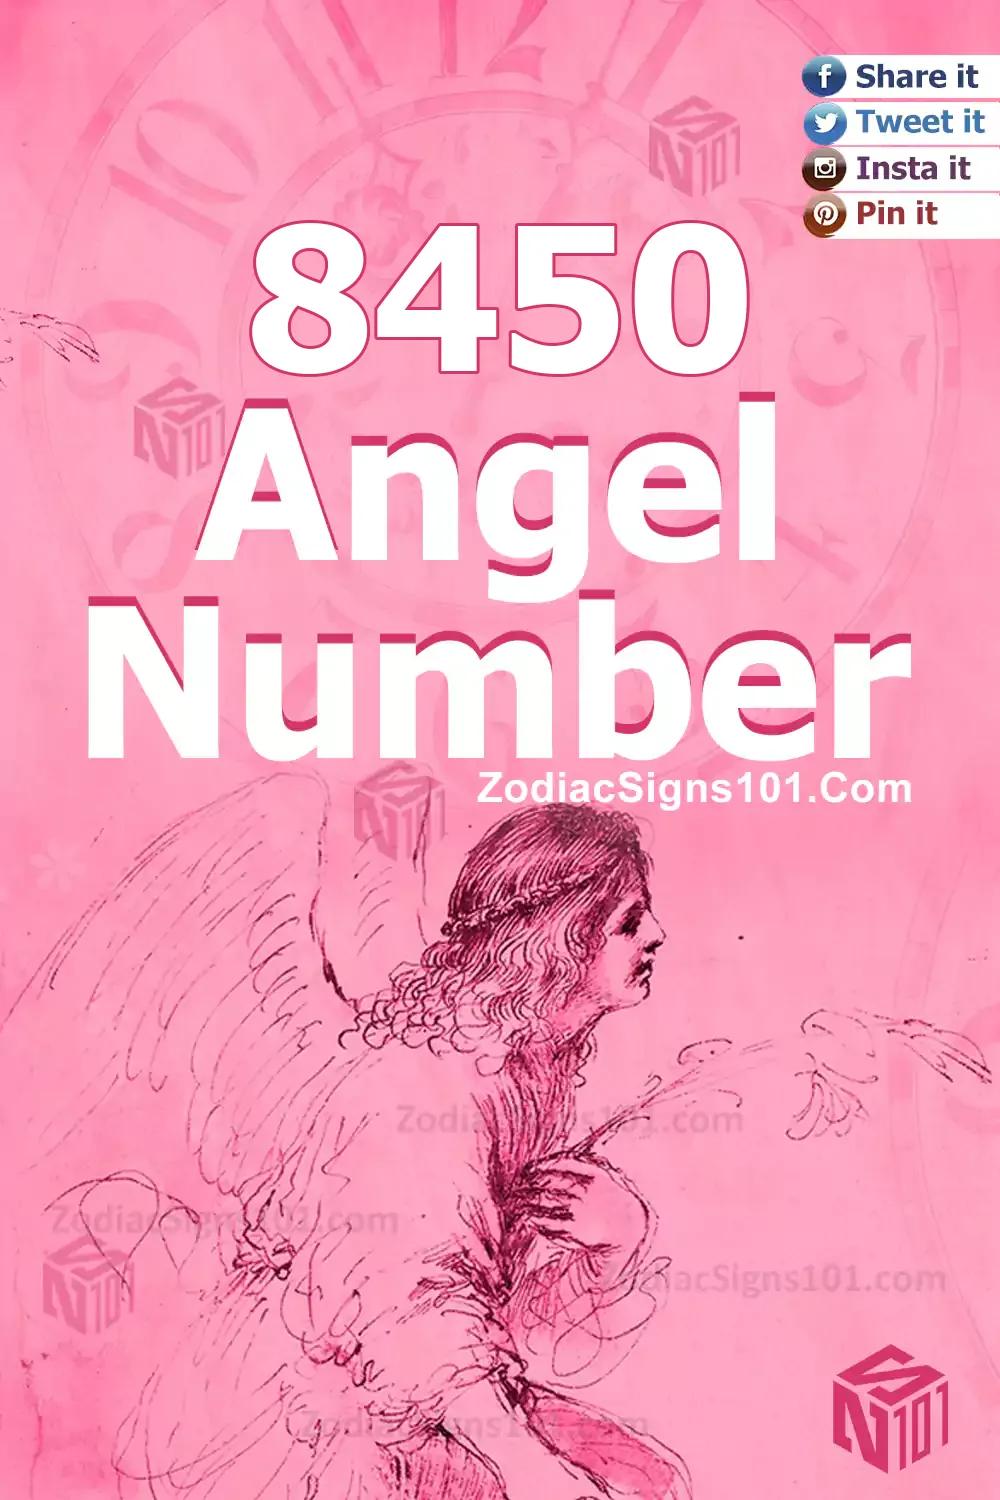 8450 Angel Number Meaning